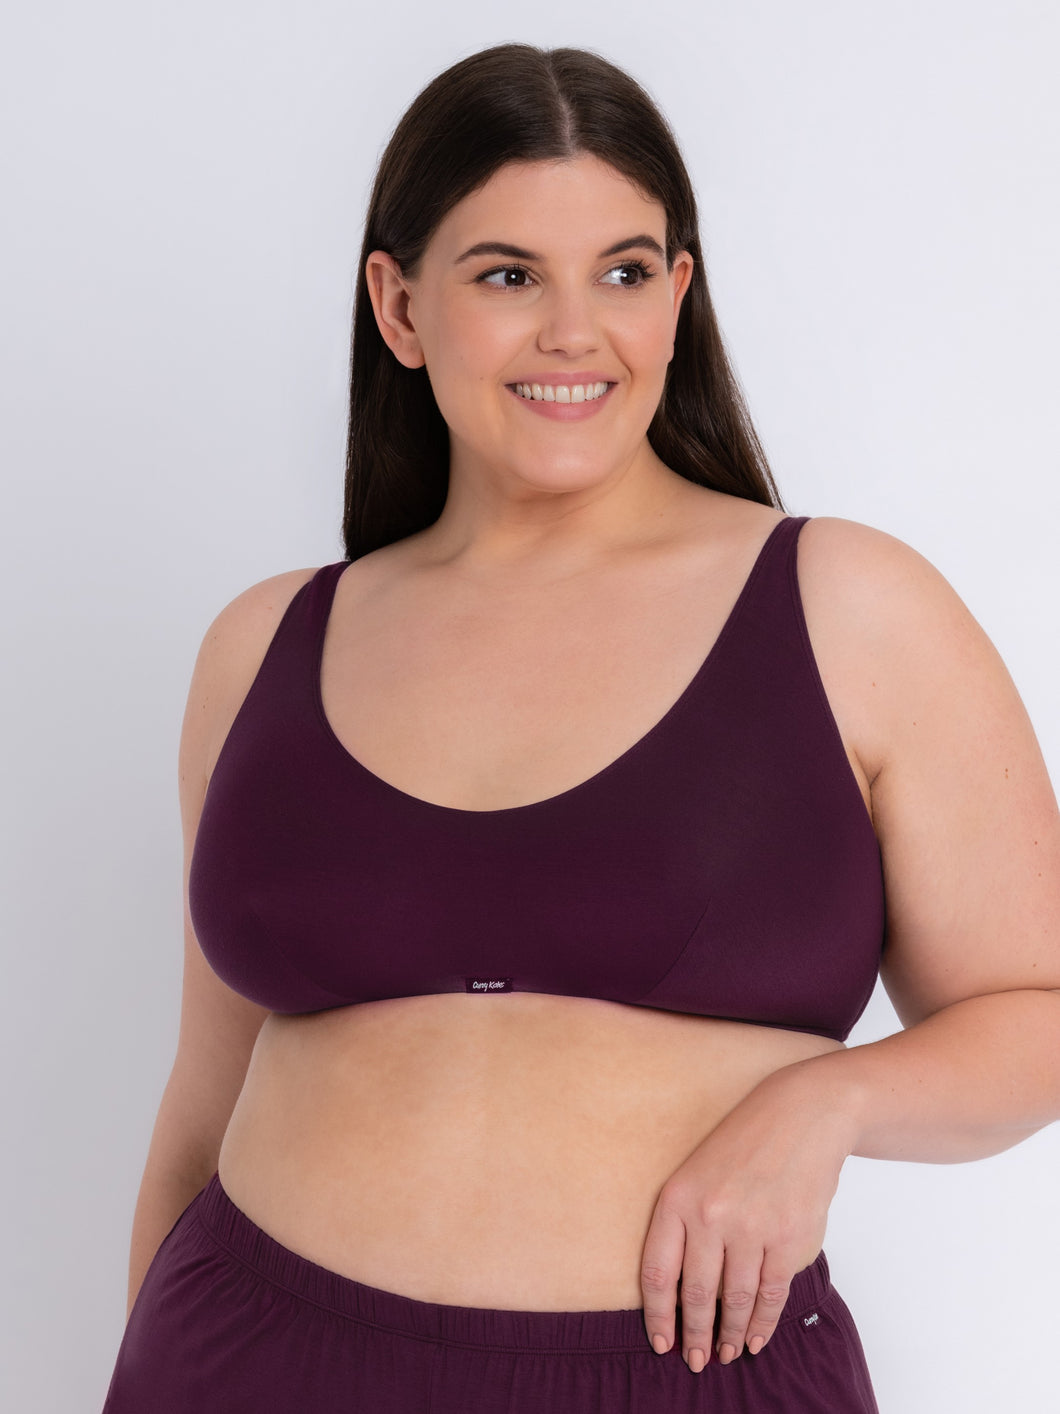 Softease Bralette - Curvy Kate - softease-crop-top - The Pencil Test - Curvy Kate